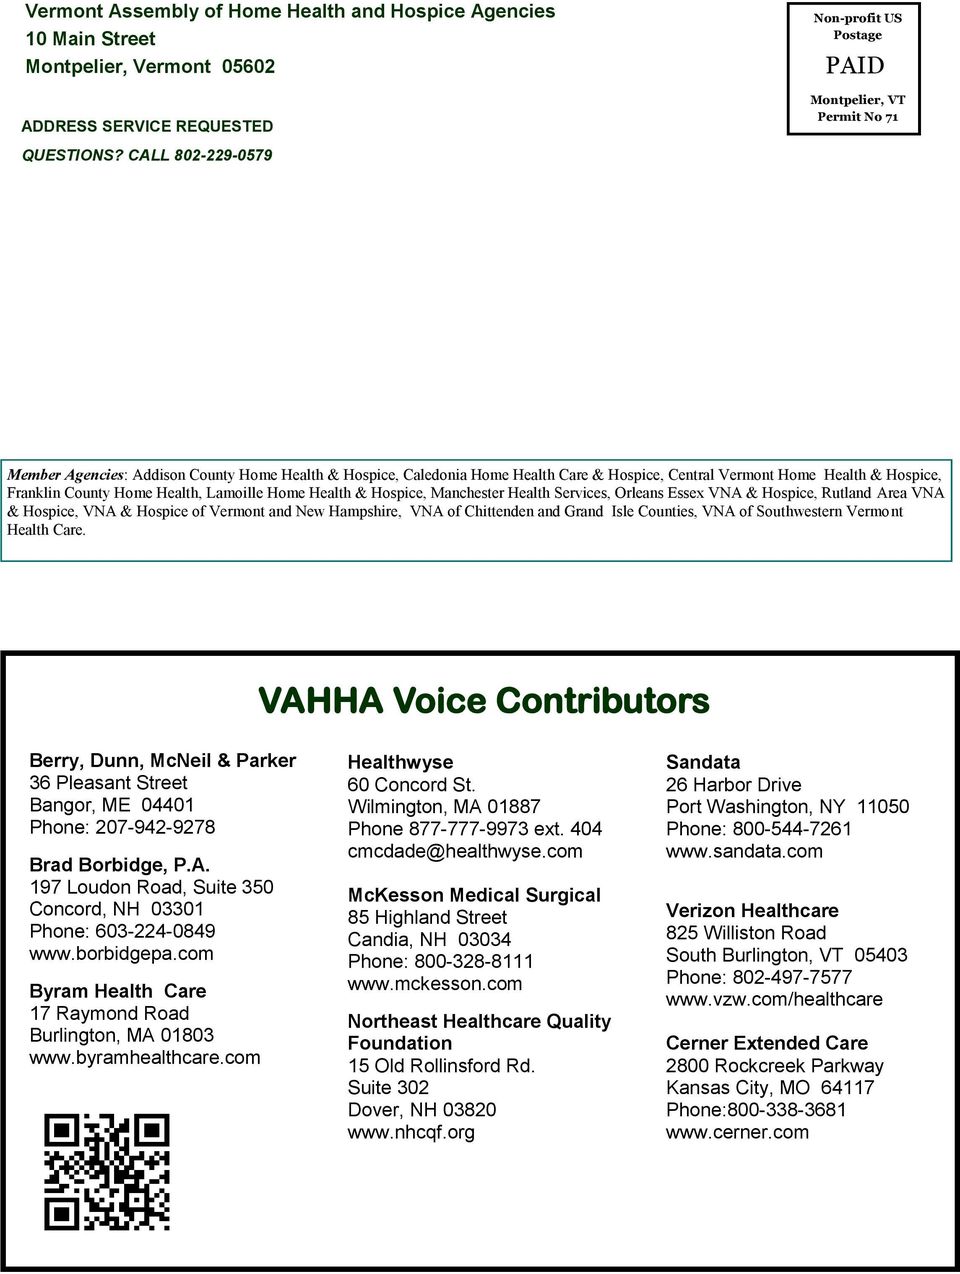 Vahha Voice The Newsletter Of The Vermont Assembly Of Home Health And Hospice Agencies Pdf Free Download